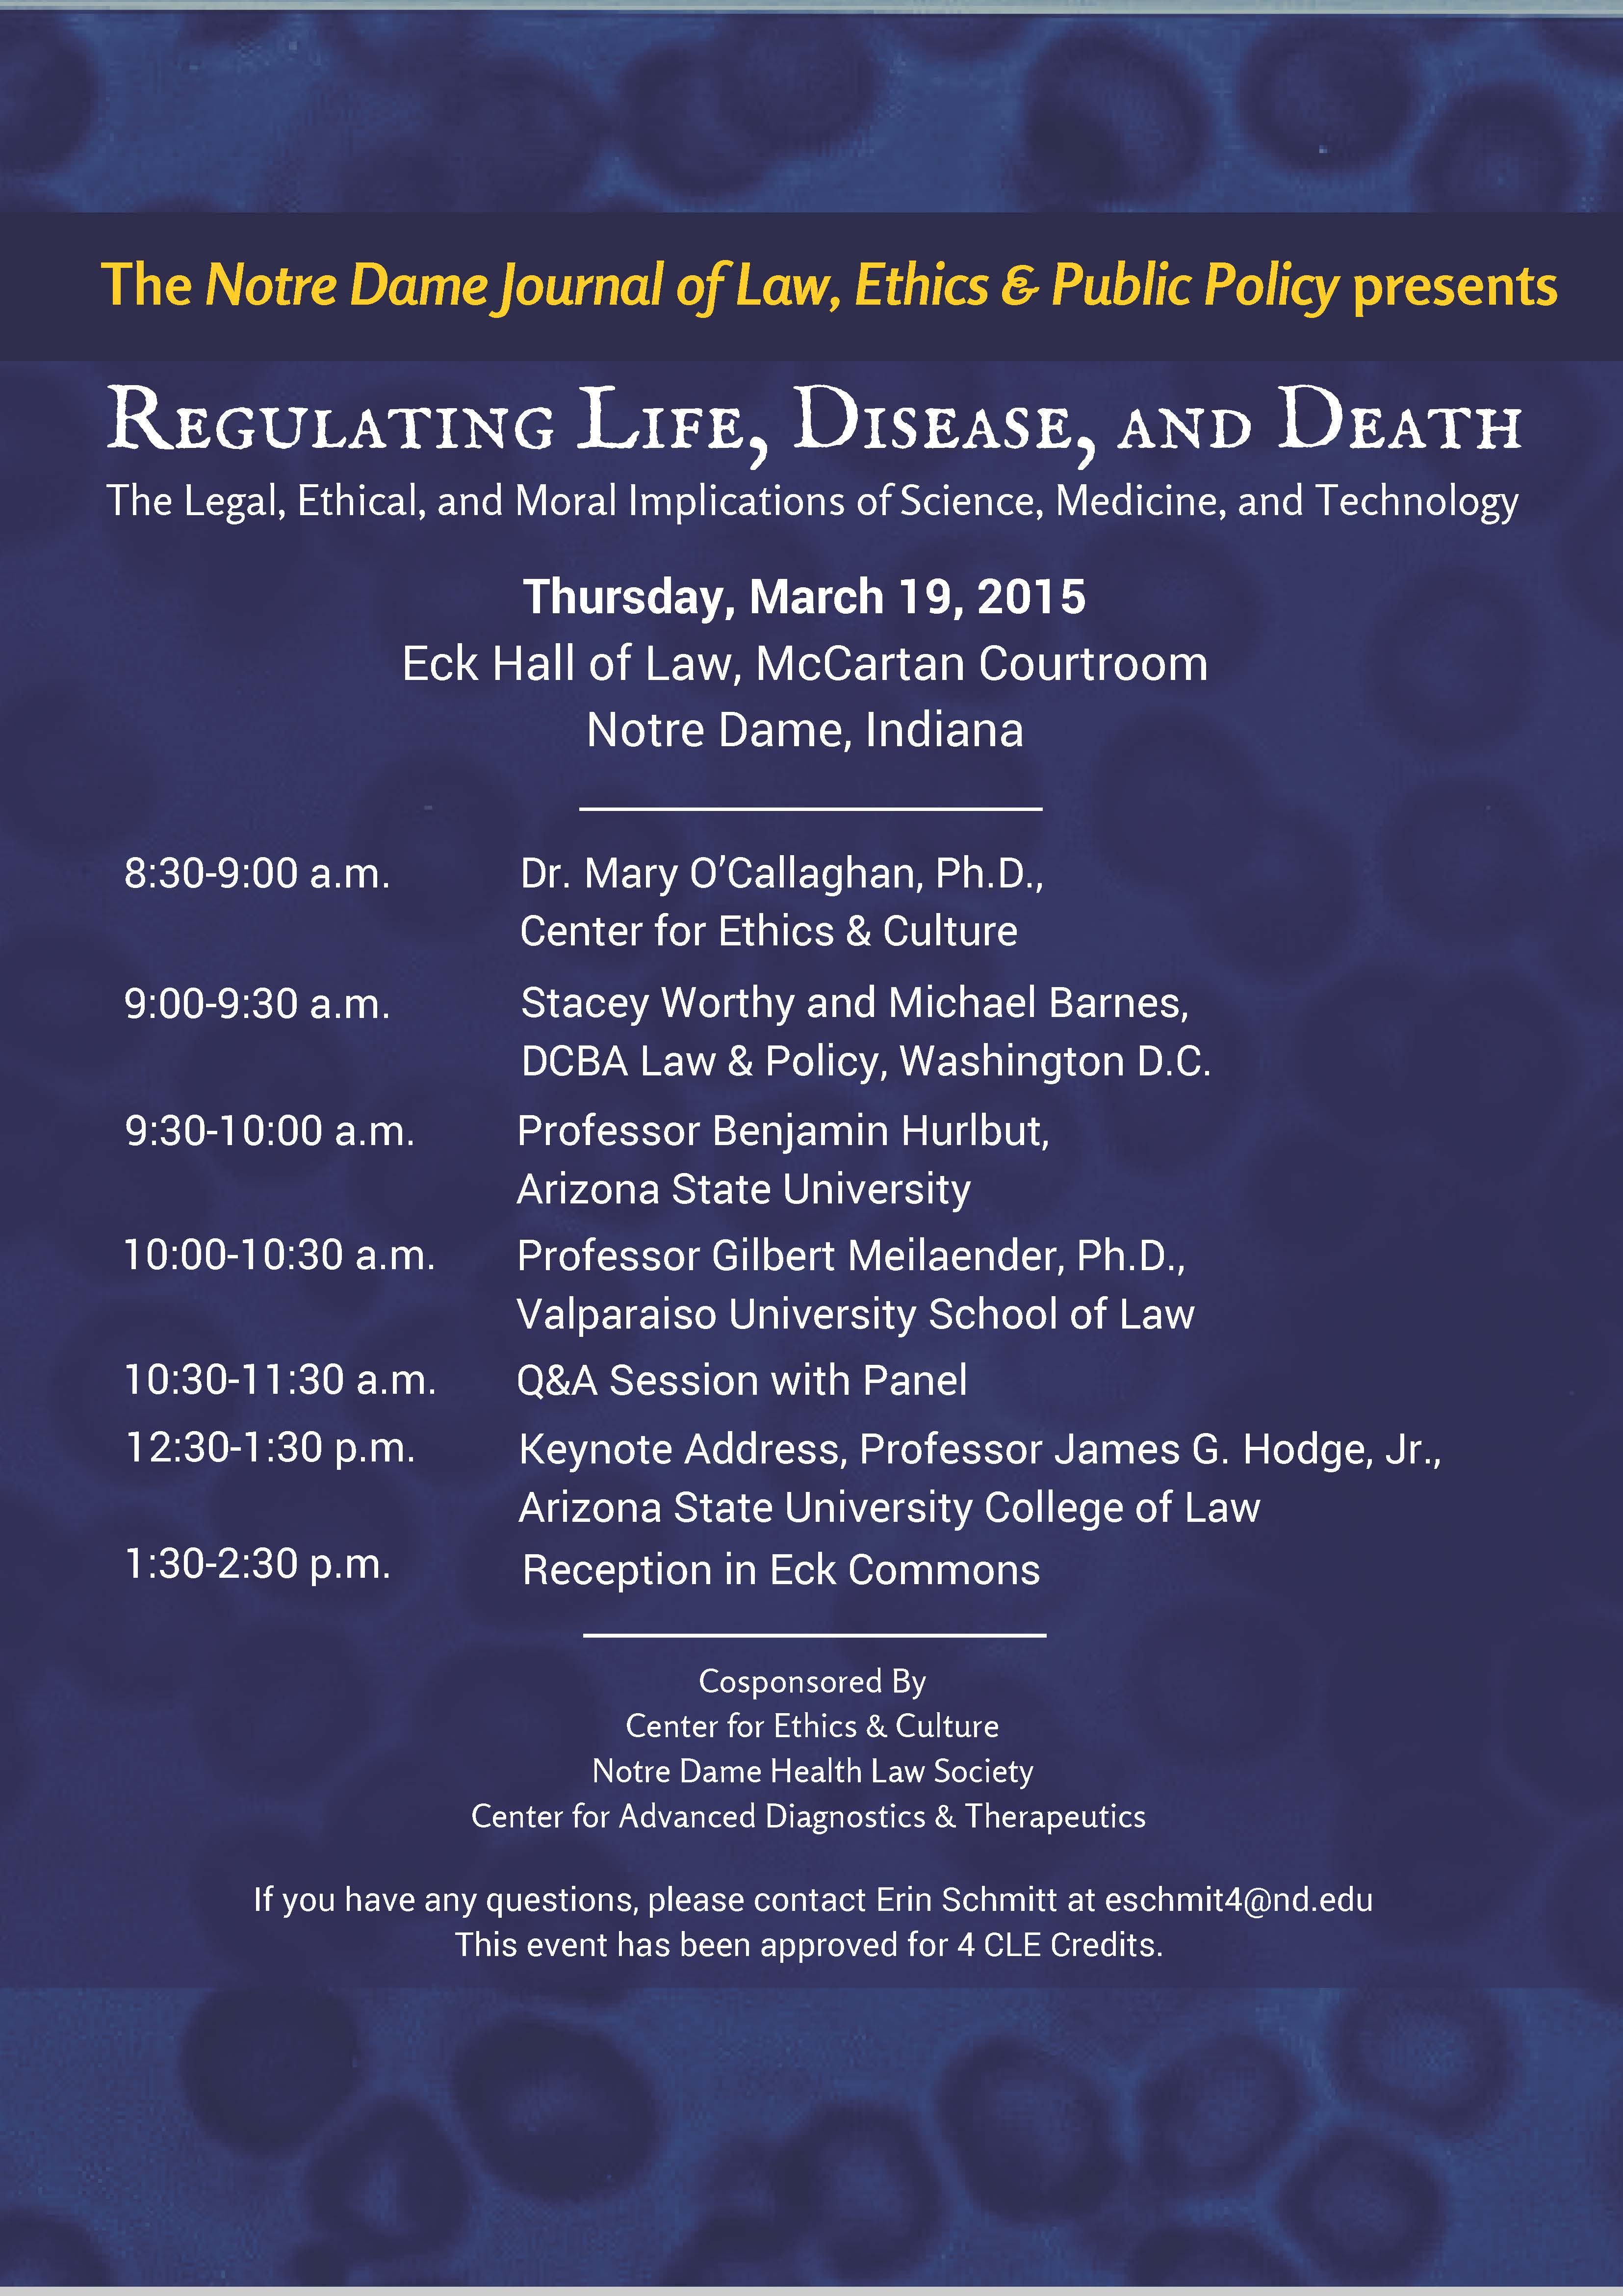 2015 - Regulating Life, Disease, and Death